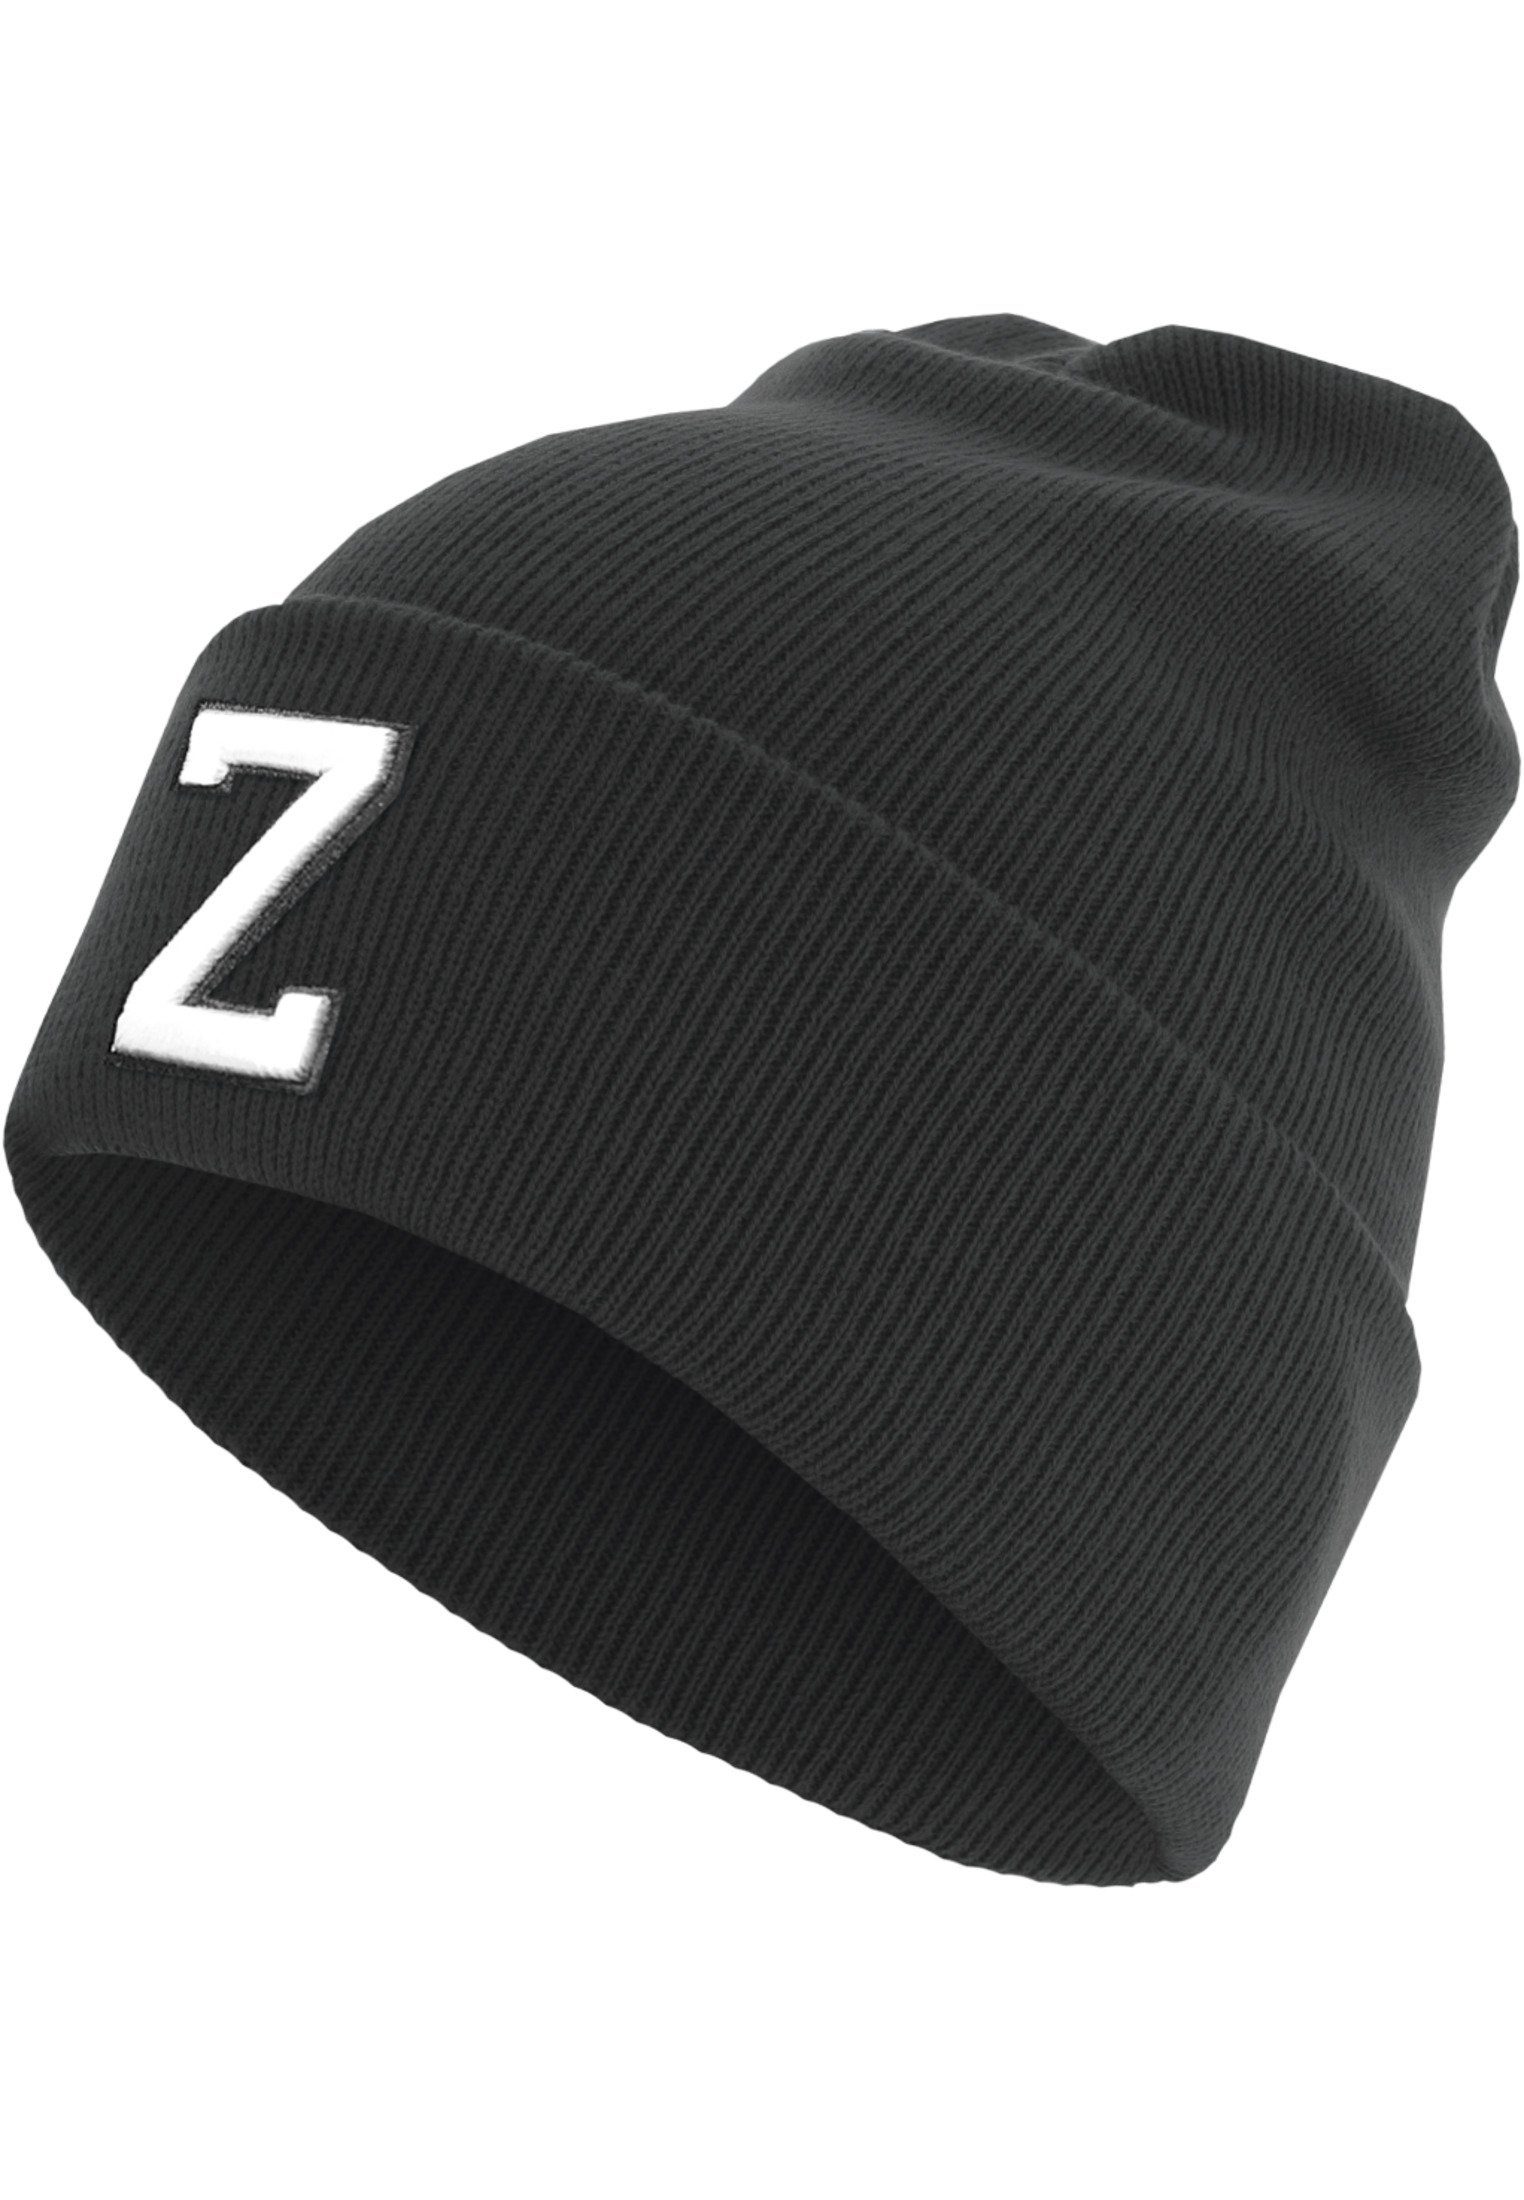 MSTRDS Beanie Cuff (1-St) Beanie Z Letter Accessoires Knit